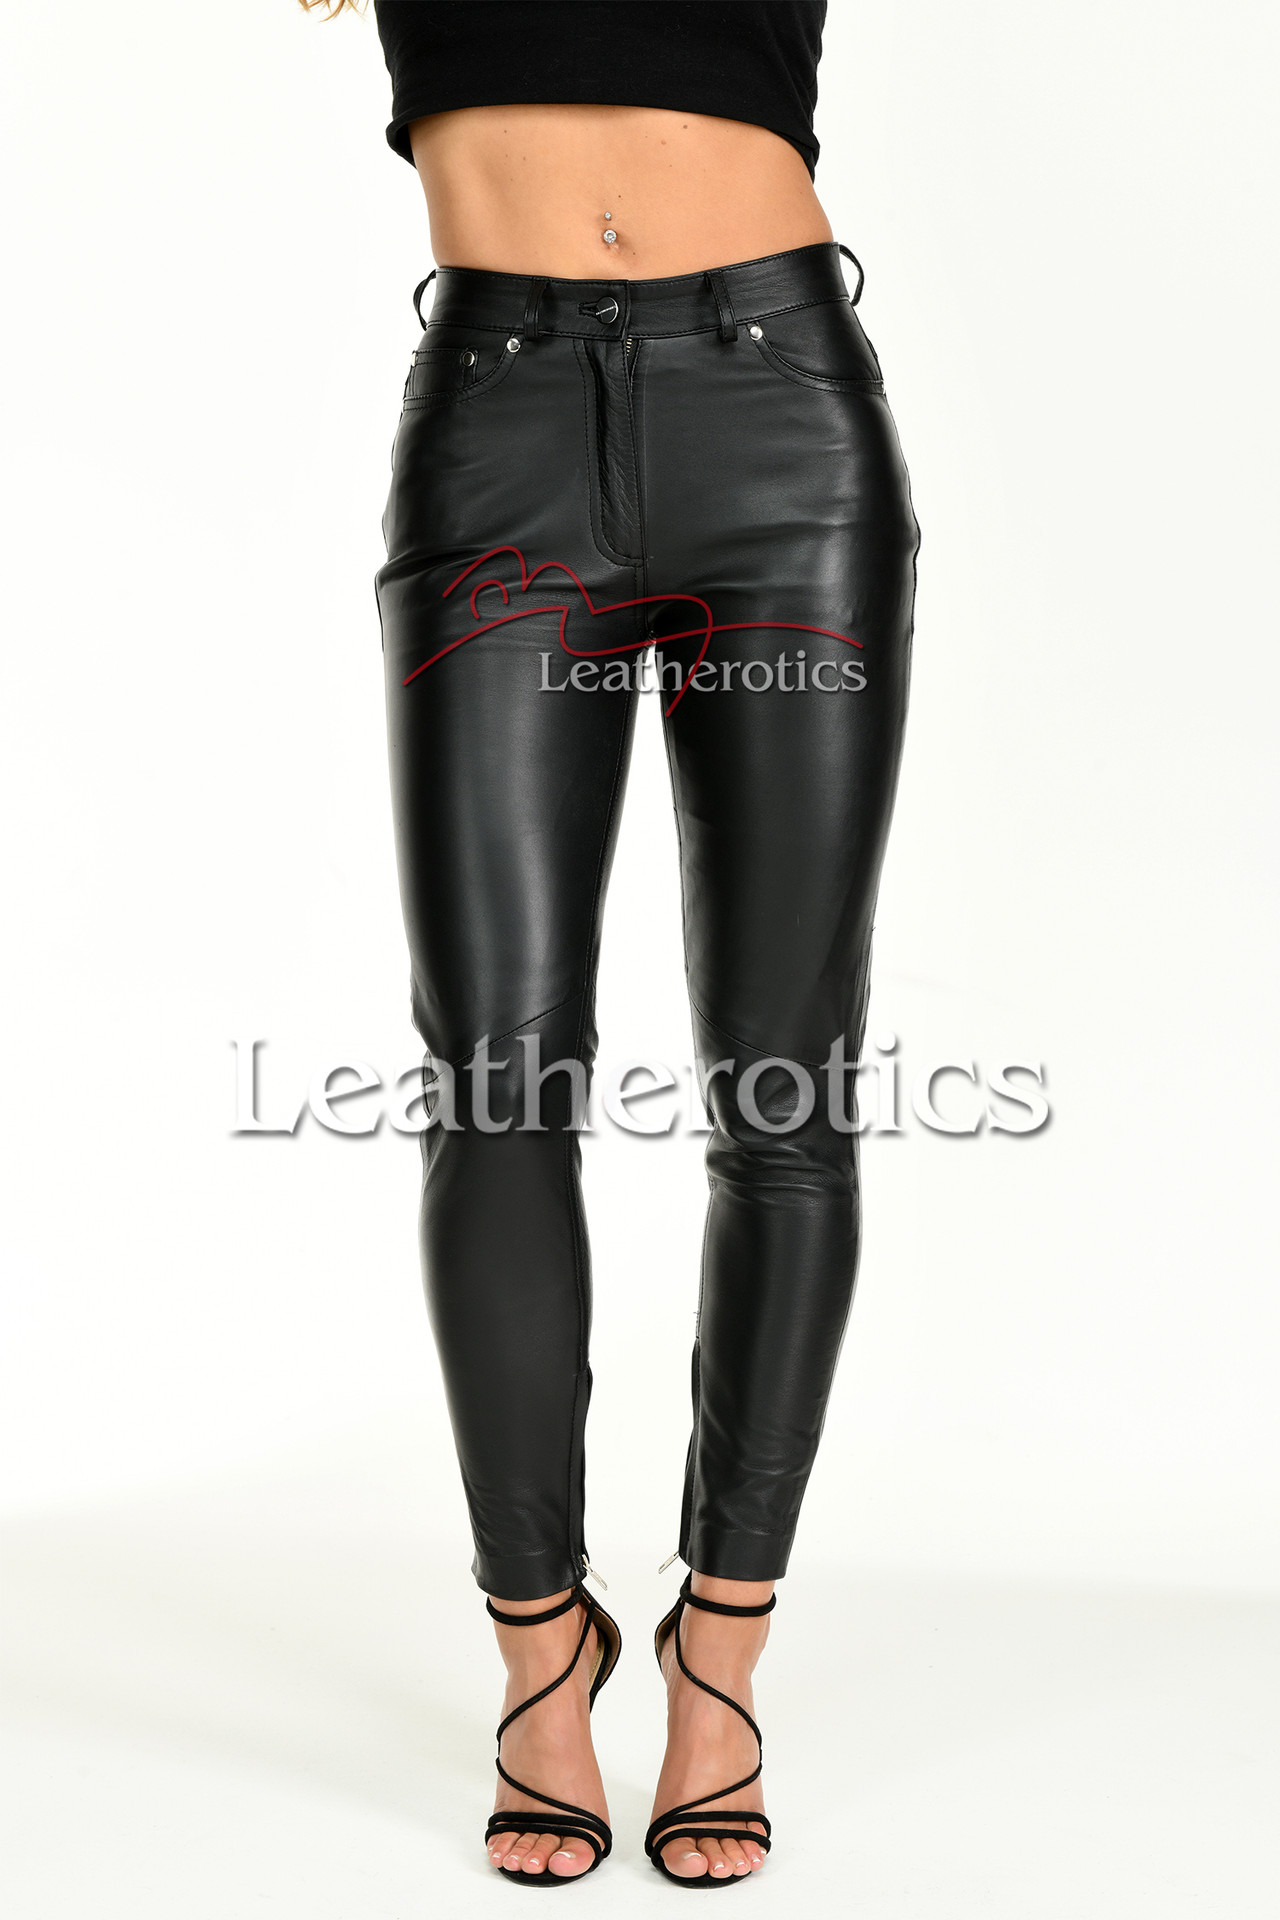 Super Skin Tight Hot Leather Trousers